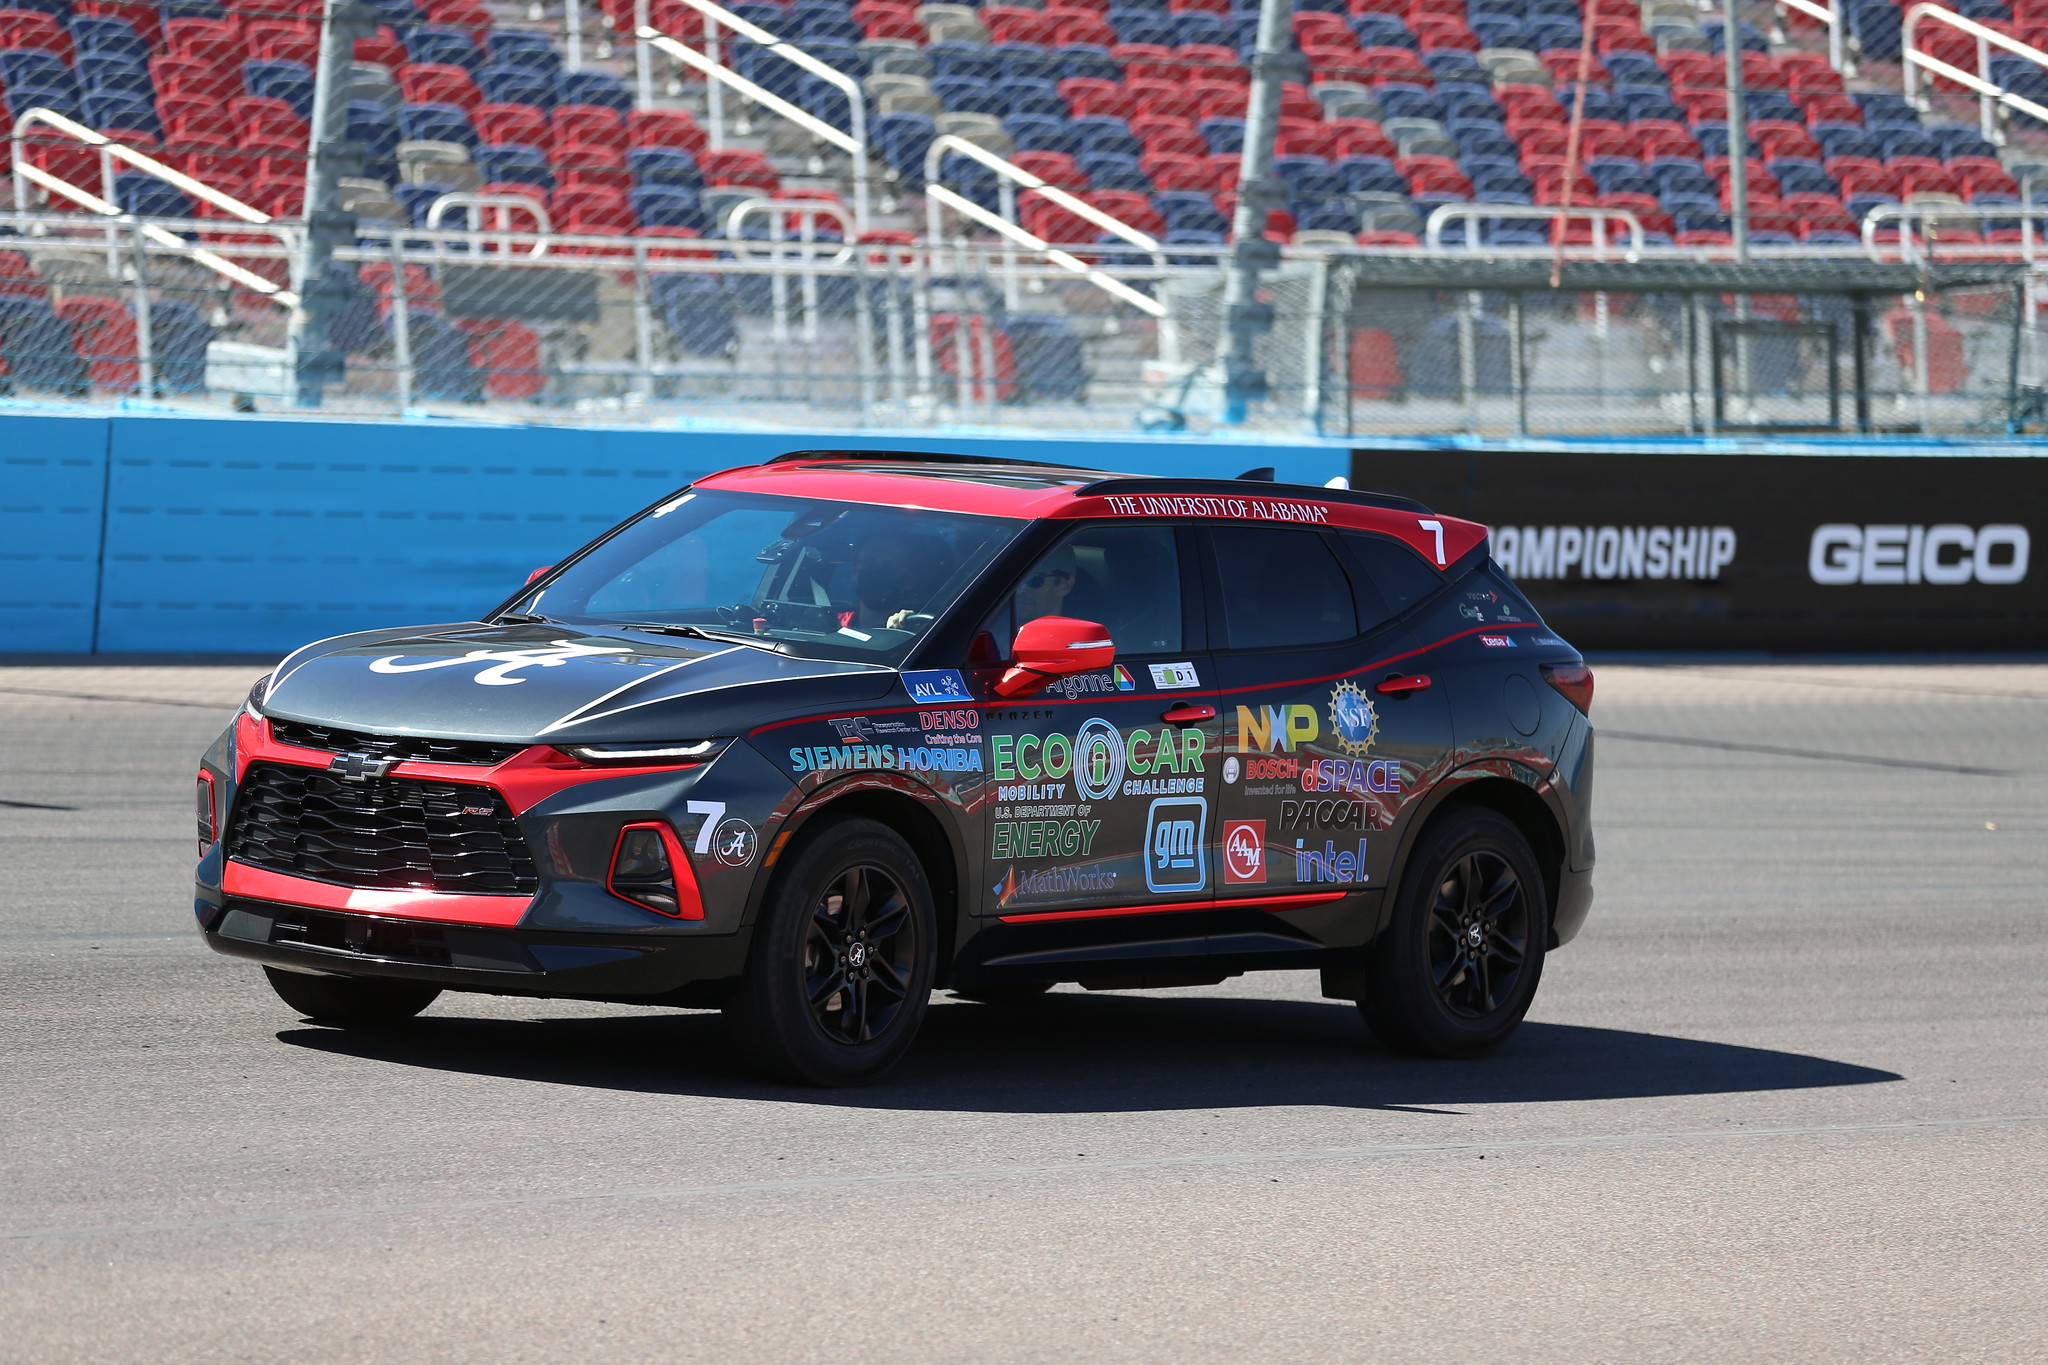 An SUV with a The University of Alabama logo on a racetrack.